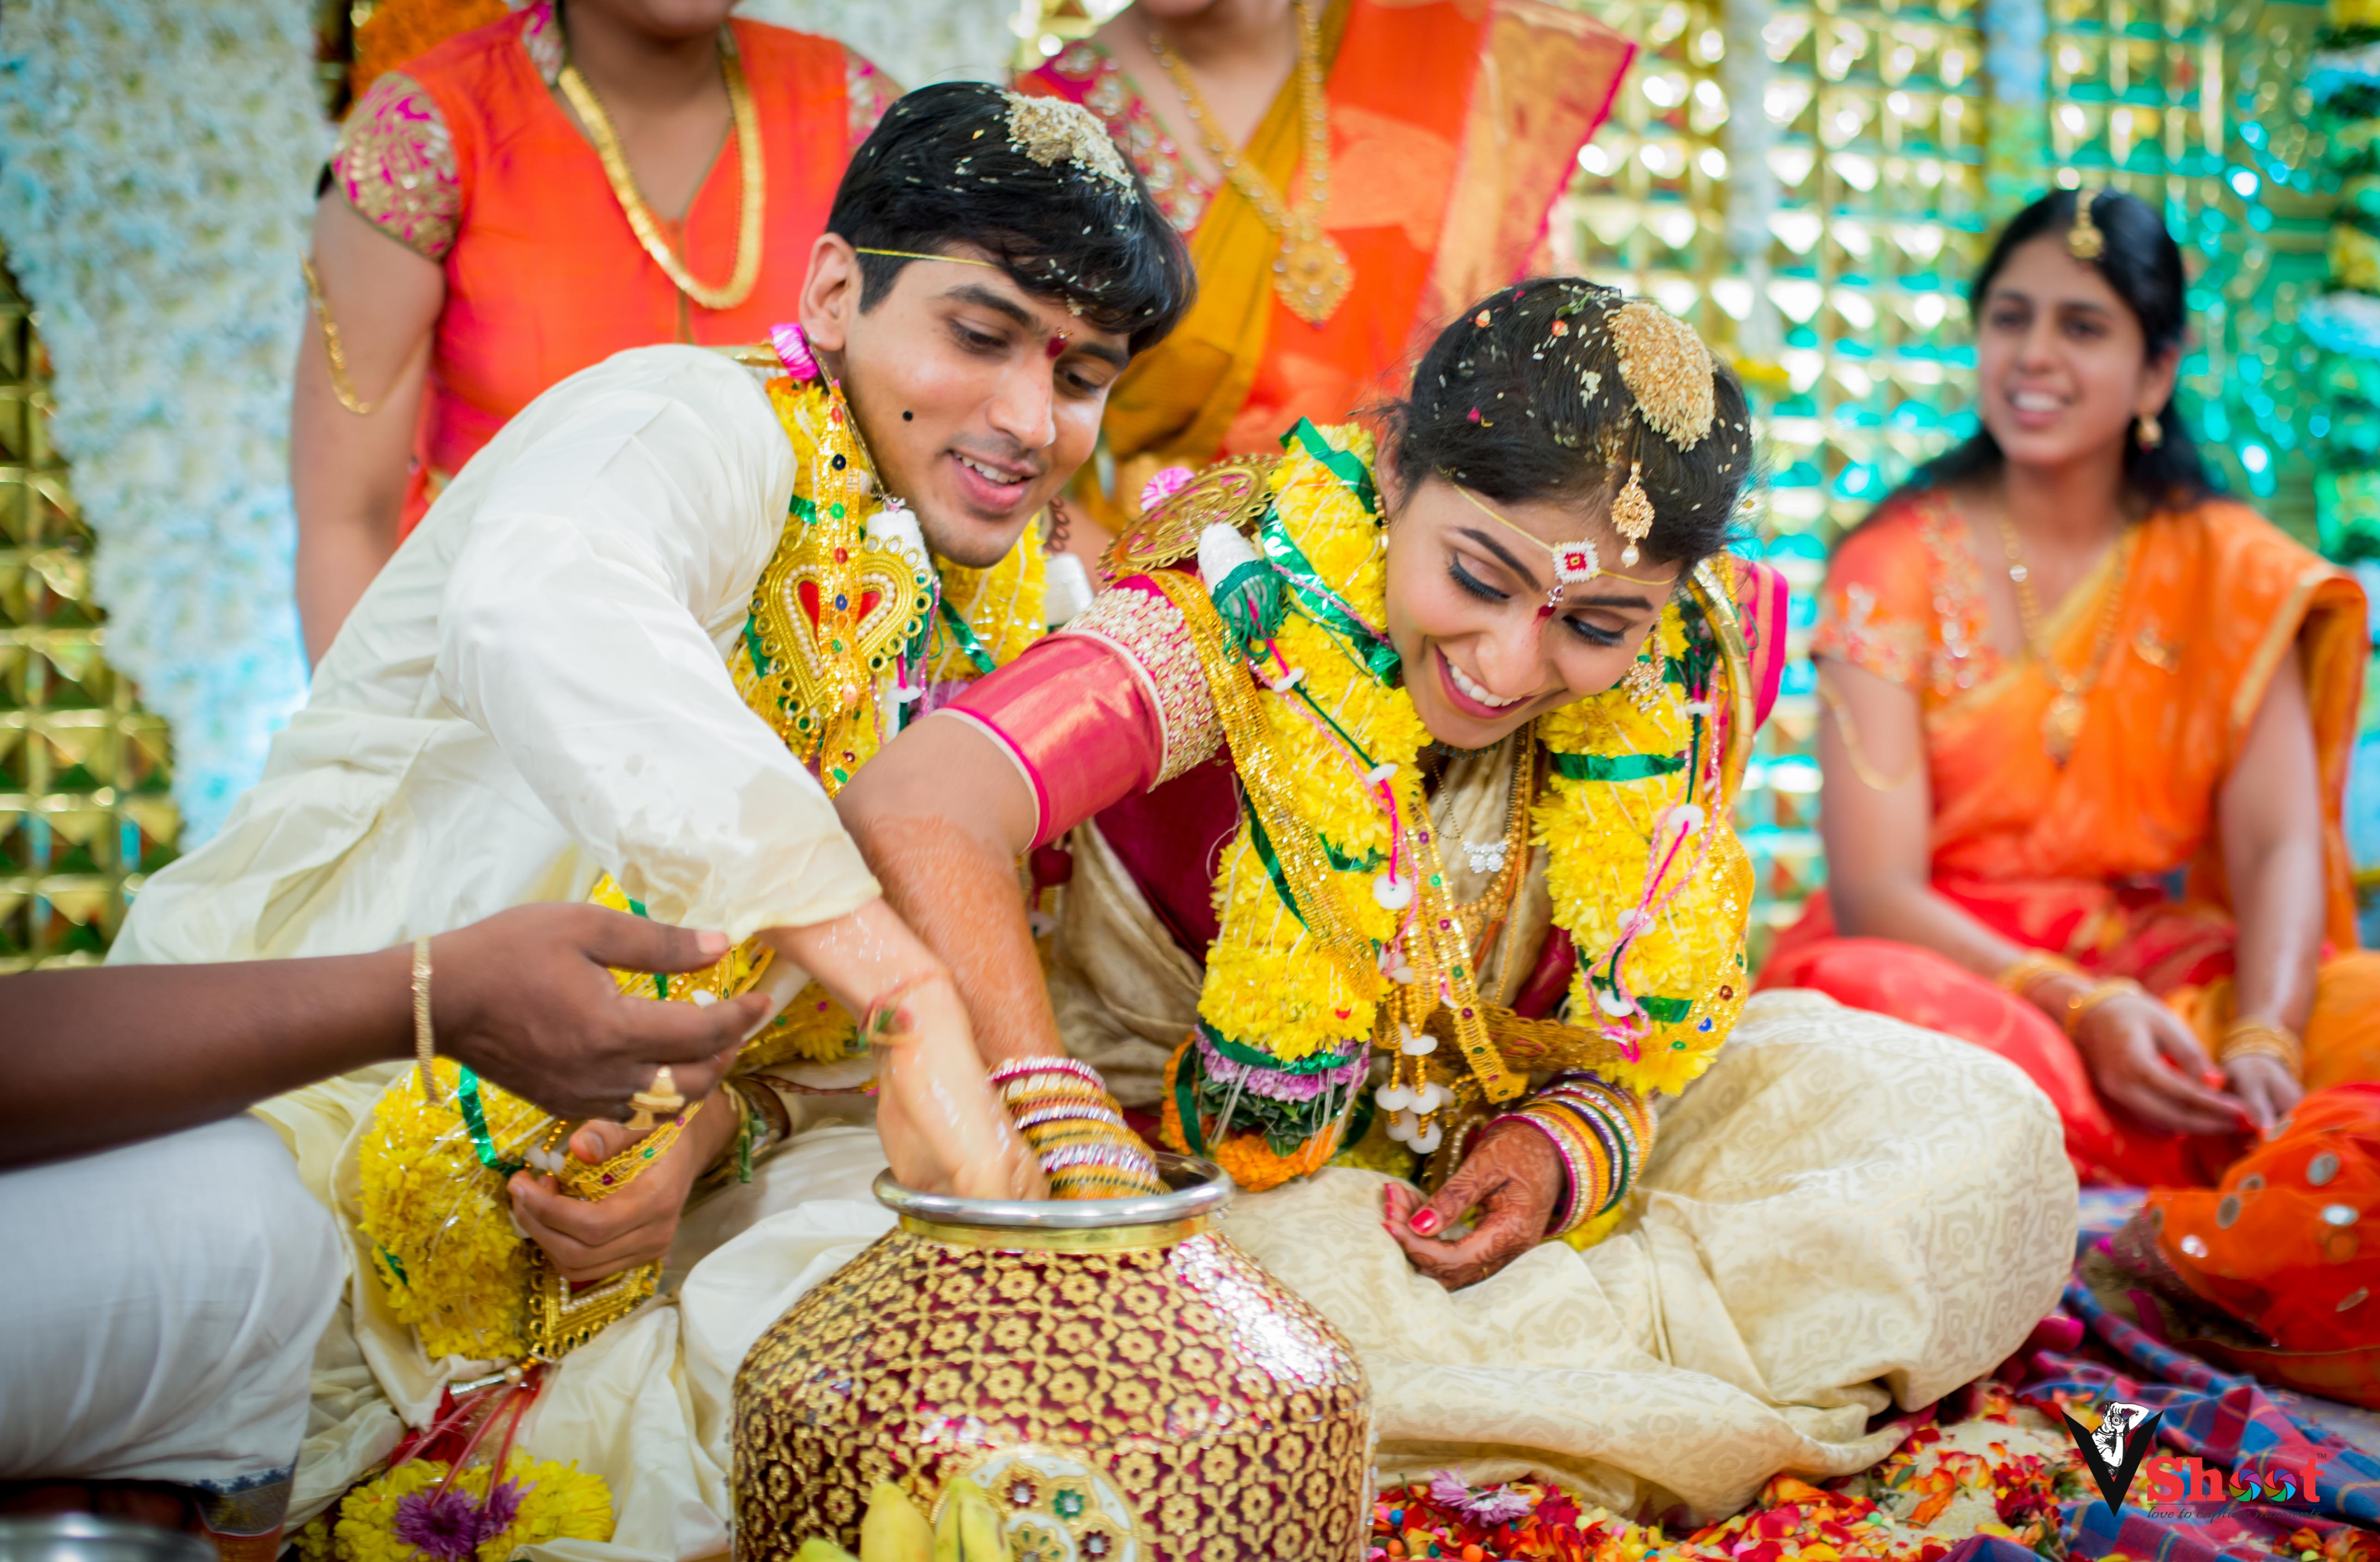 professional photographers in hyderabad